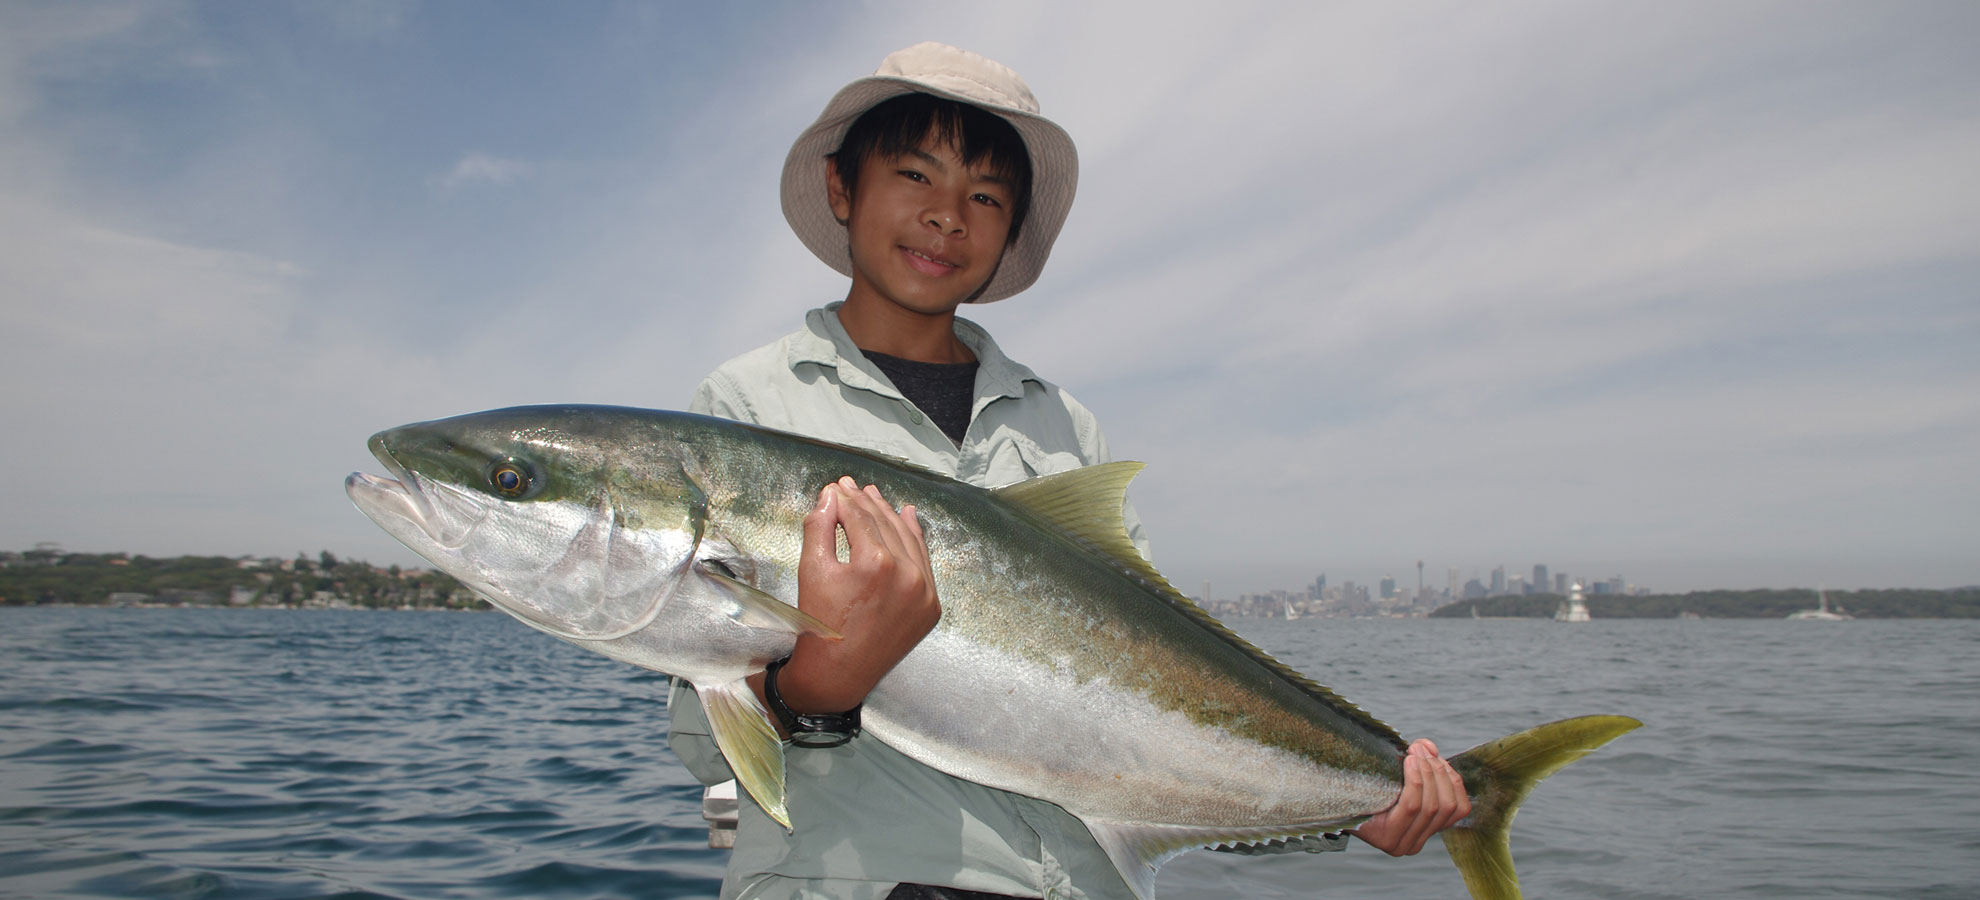 How to catch Sydney harbour kingfish - Fishabout Fishing Charters Sydney  Harbour With Craig McGill